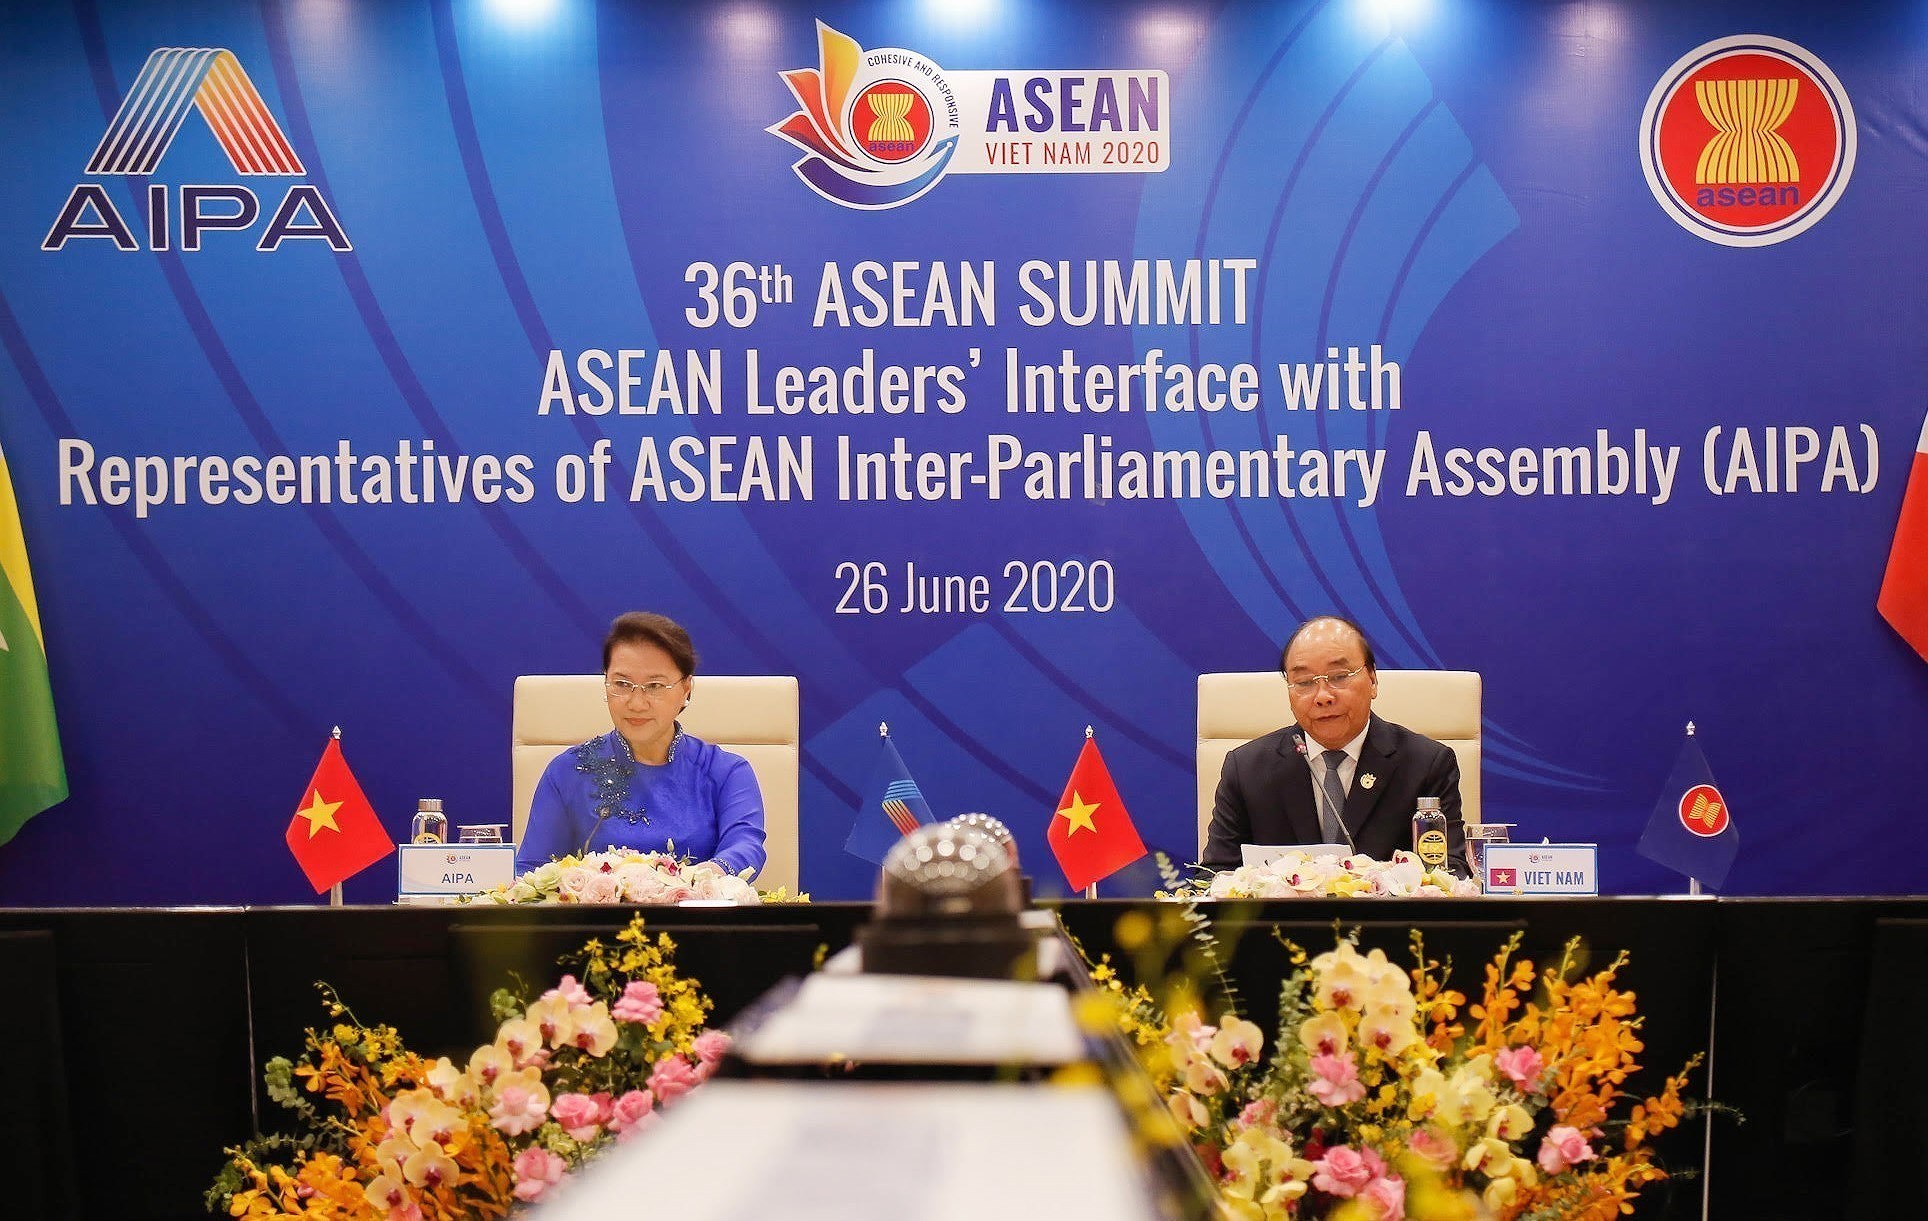 ASEAN Leaders’ Interface with Representatives of ASEAN Inter-Parliamentary Assembly hinh anh 4